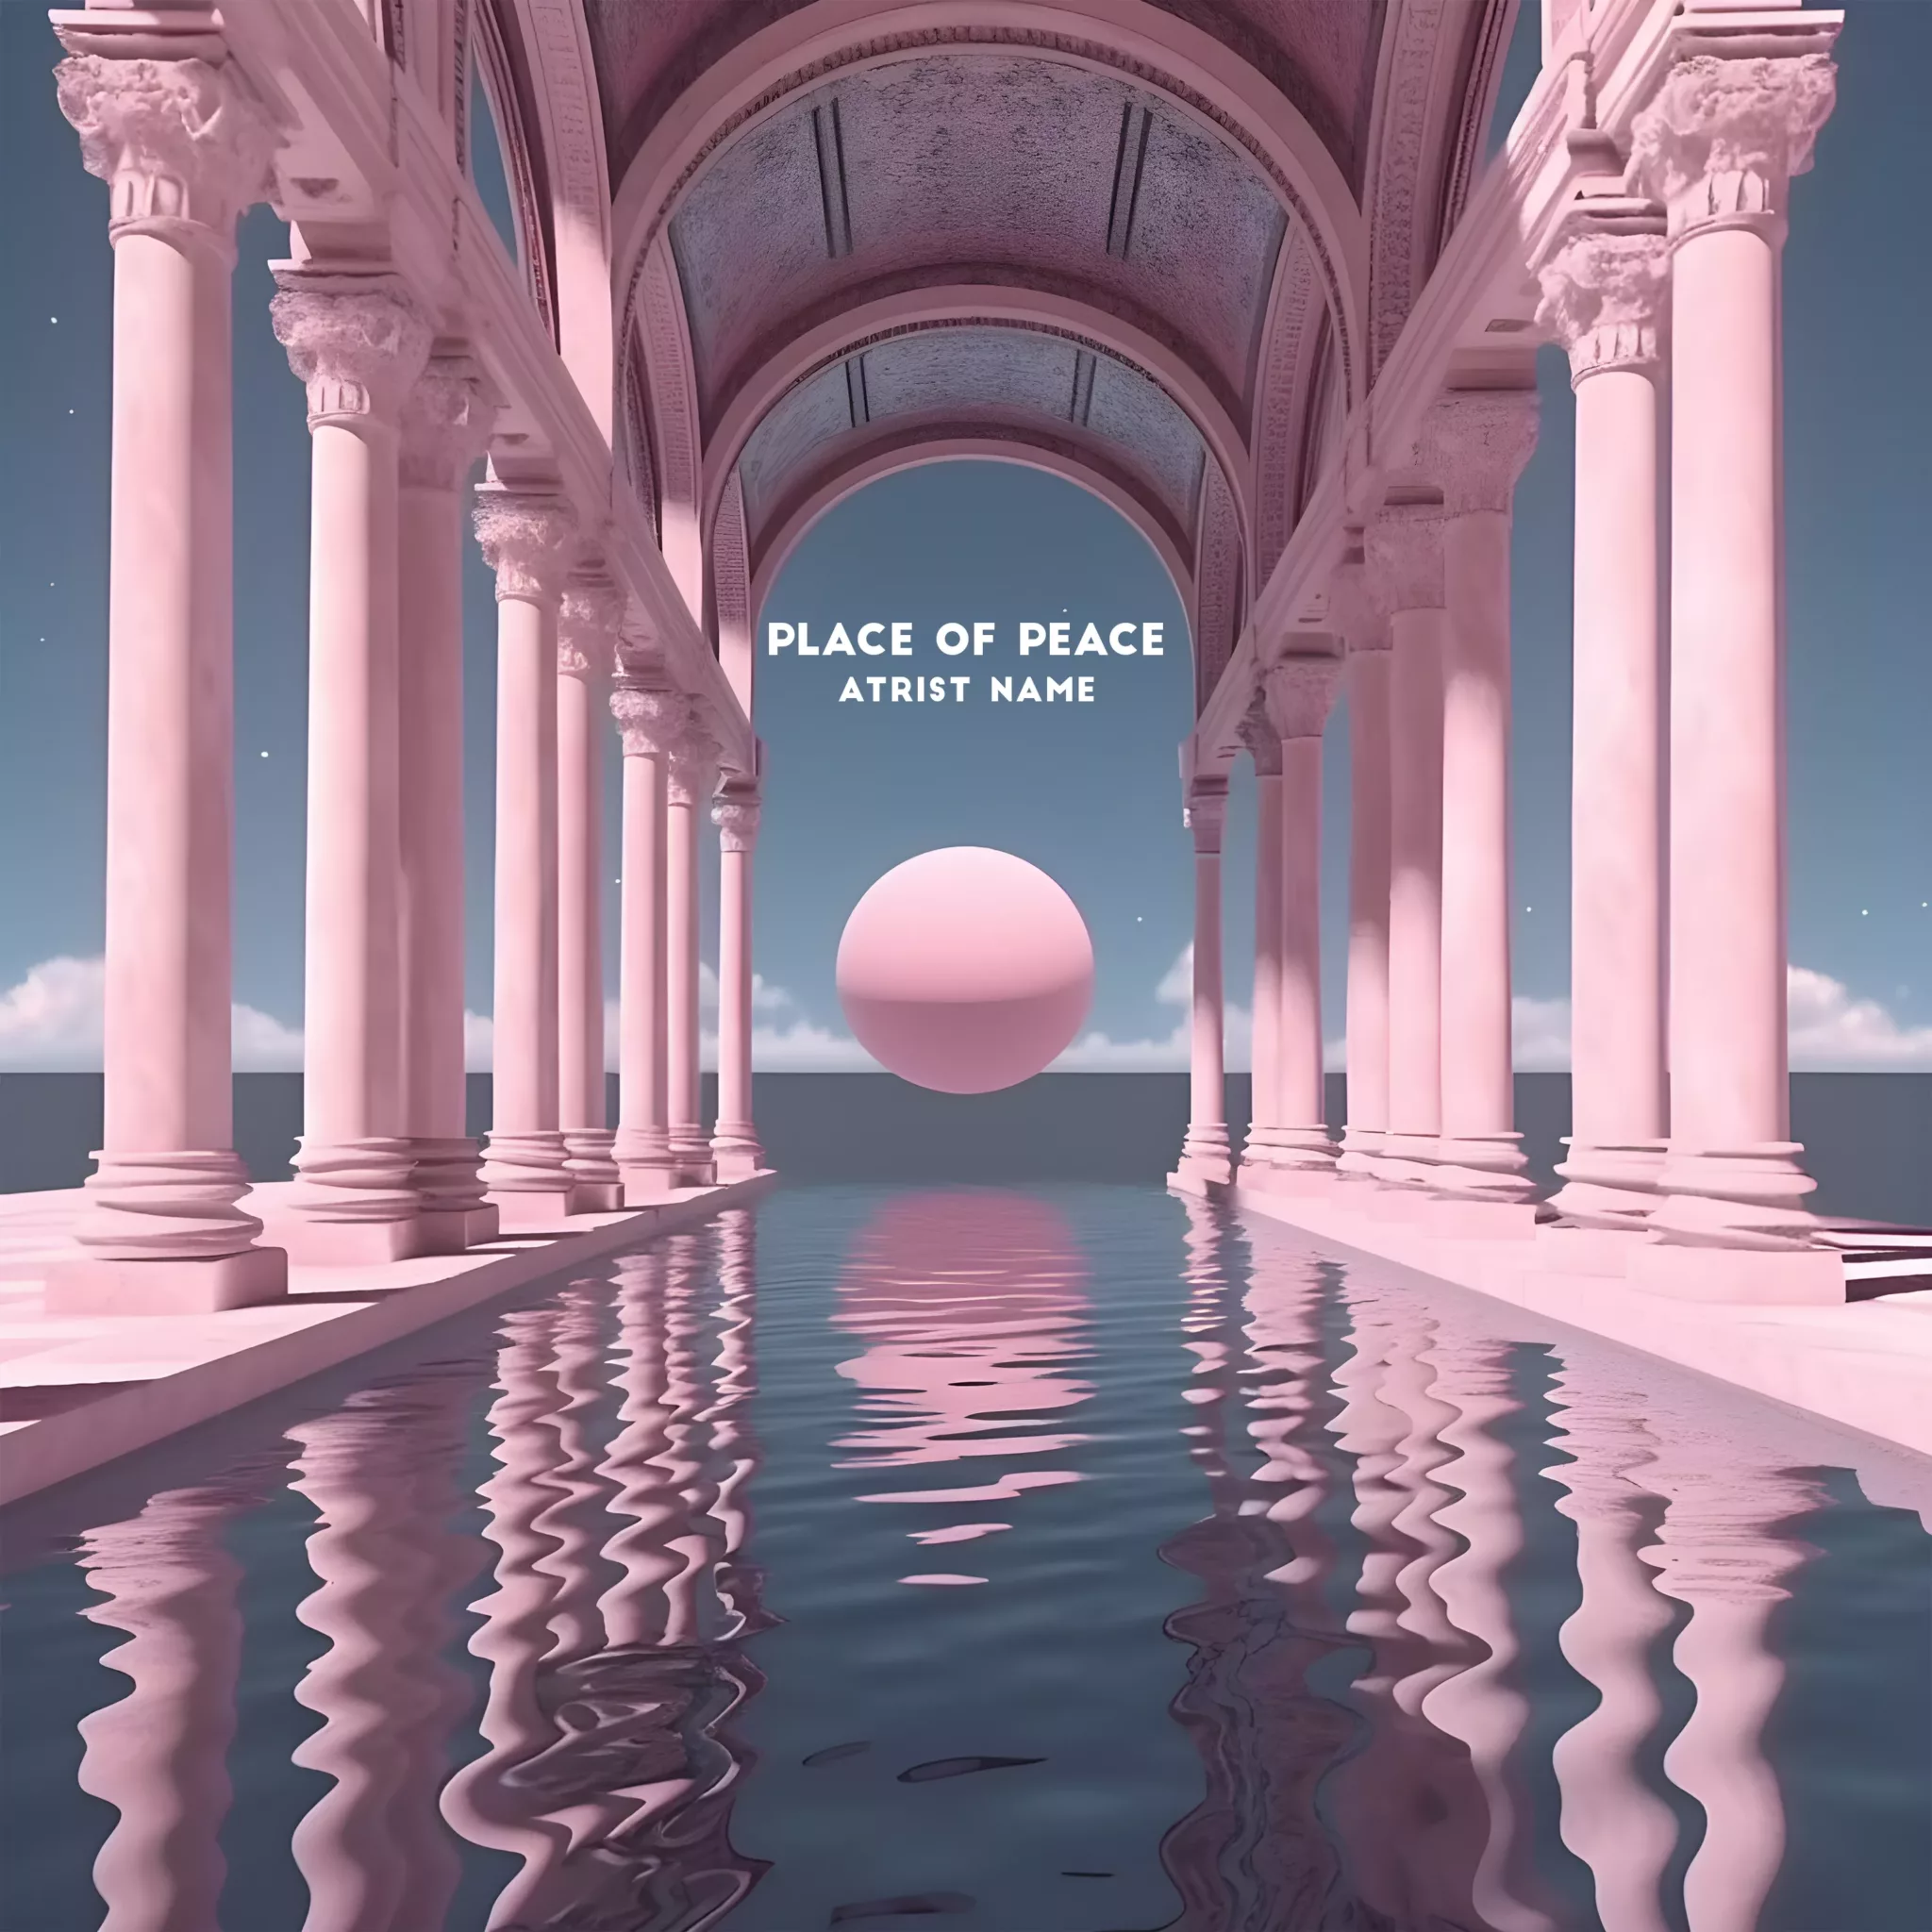 Place of peace cover art for sale